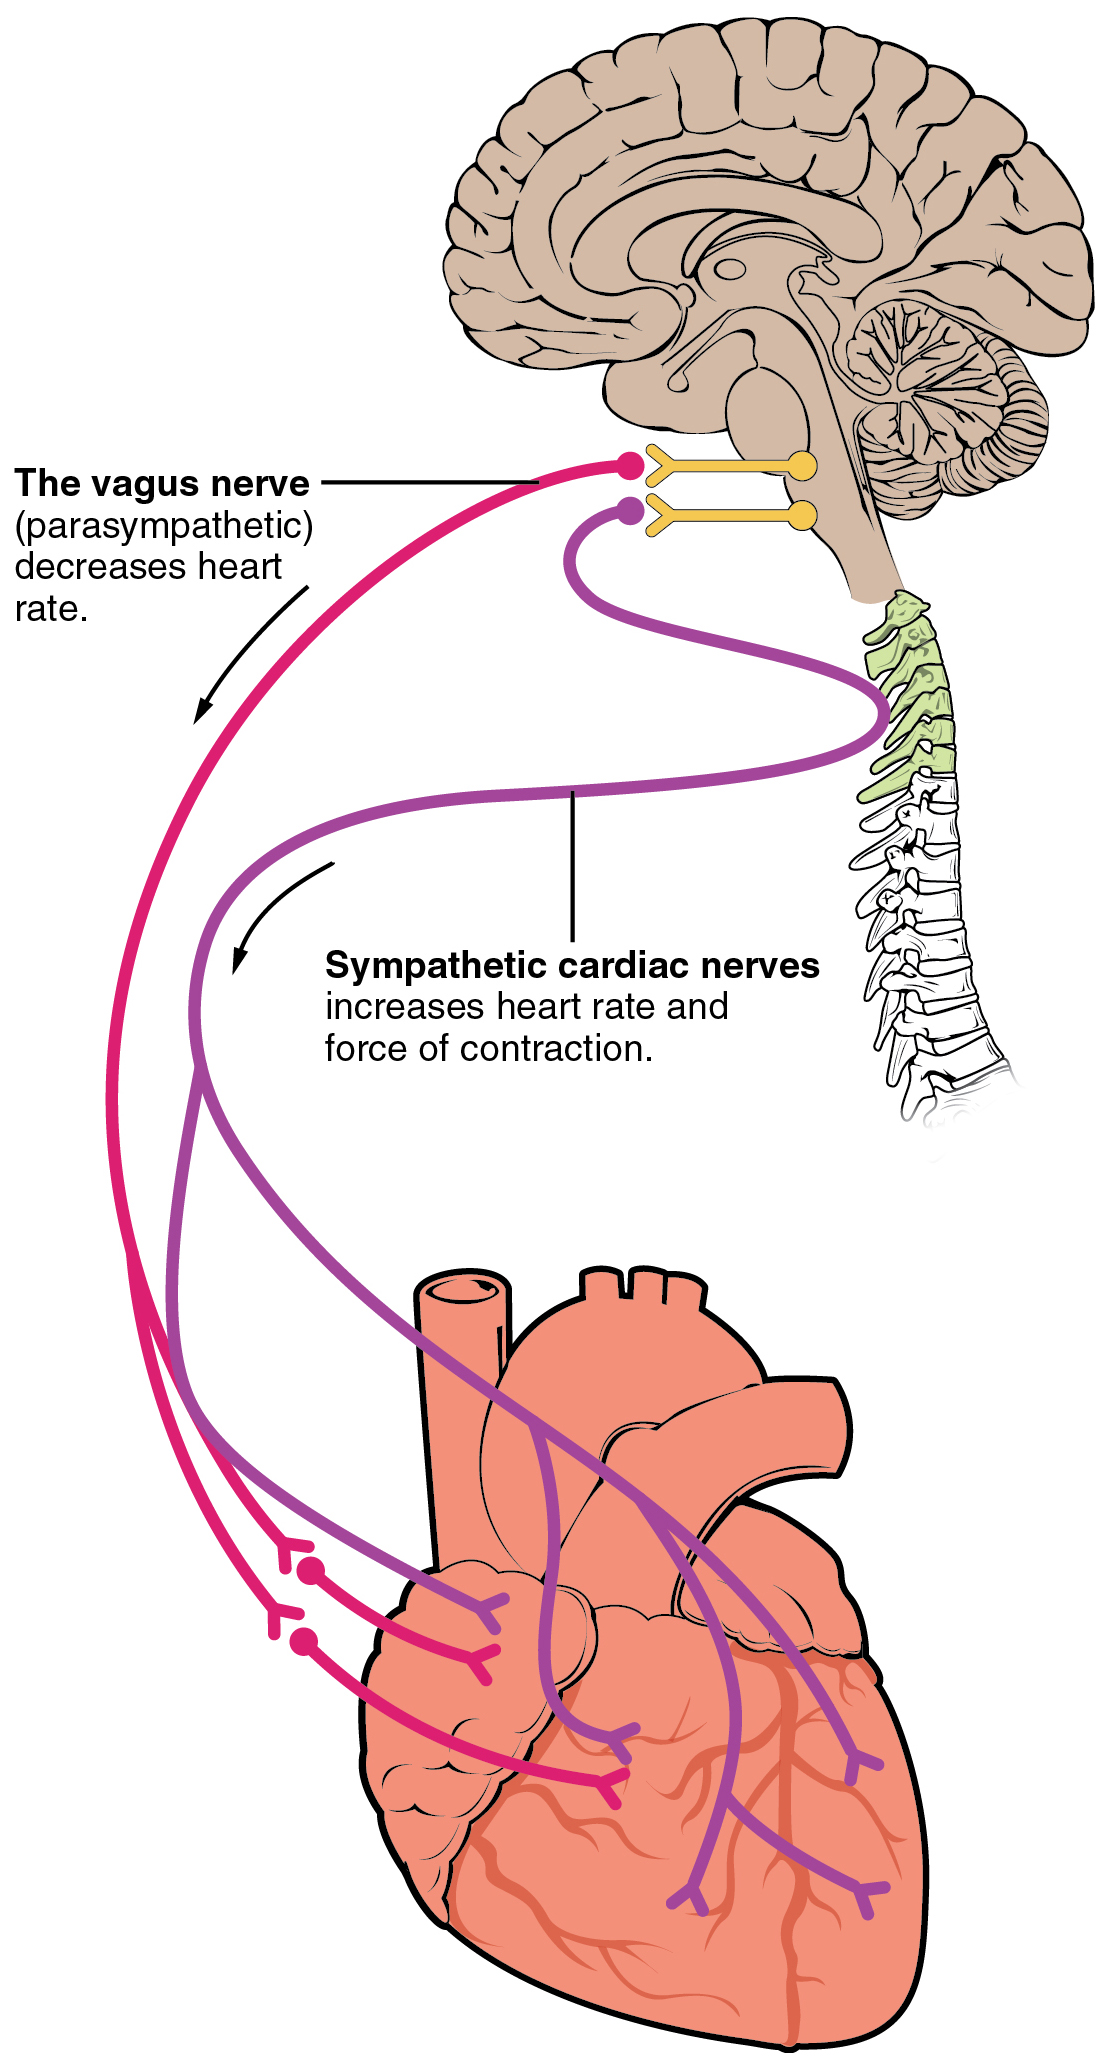 The vagus nerve (parasympathetic] decreases heart rate. Sympathetic cardiac nerves increases heart rate and force of contraction.